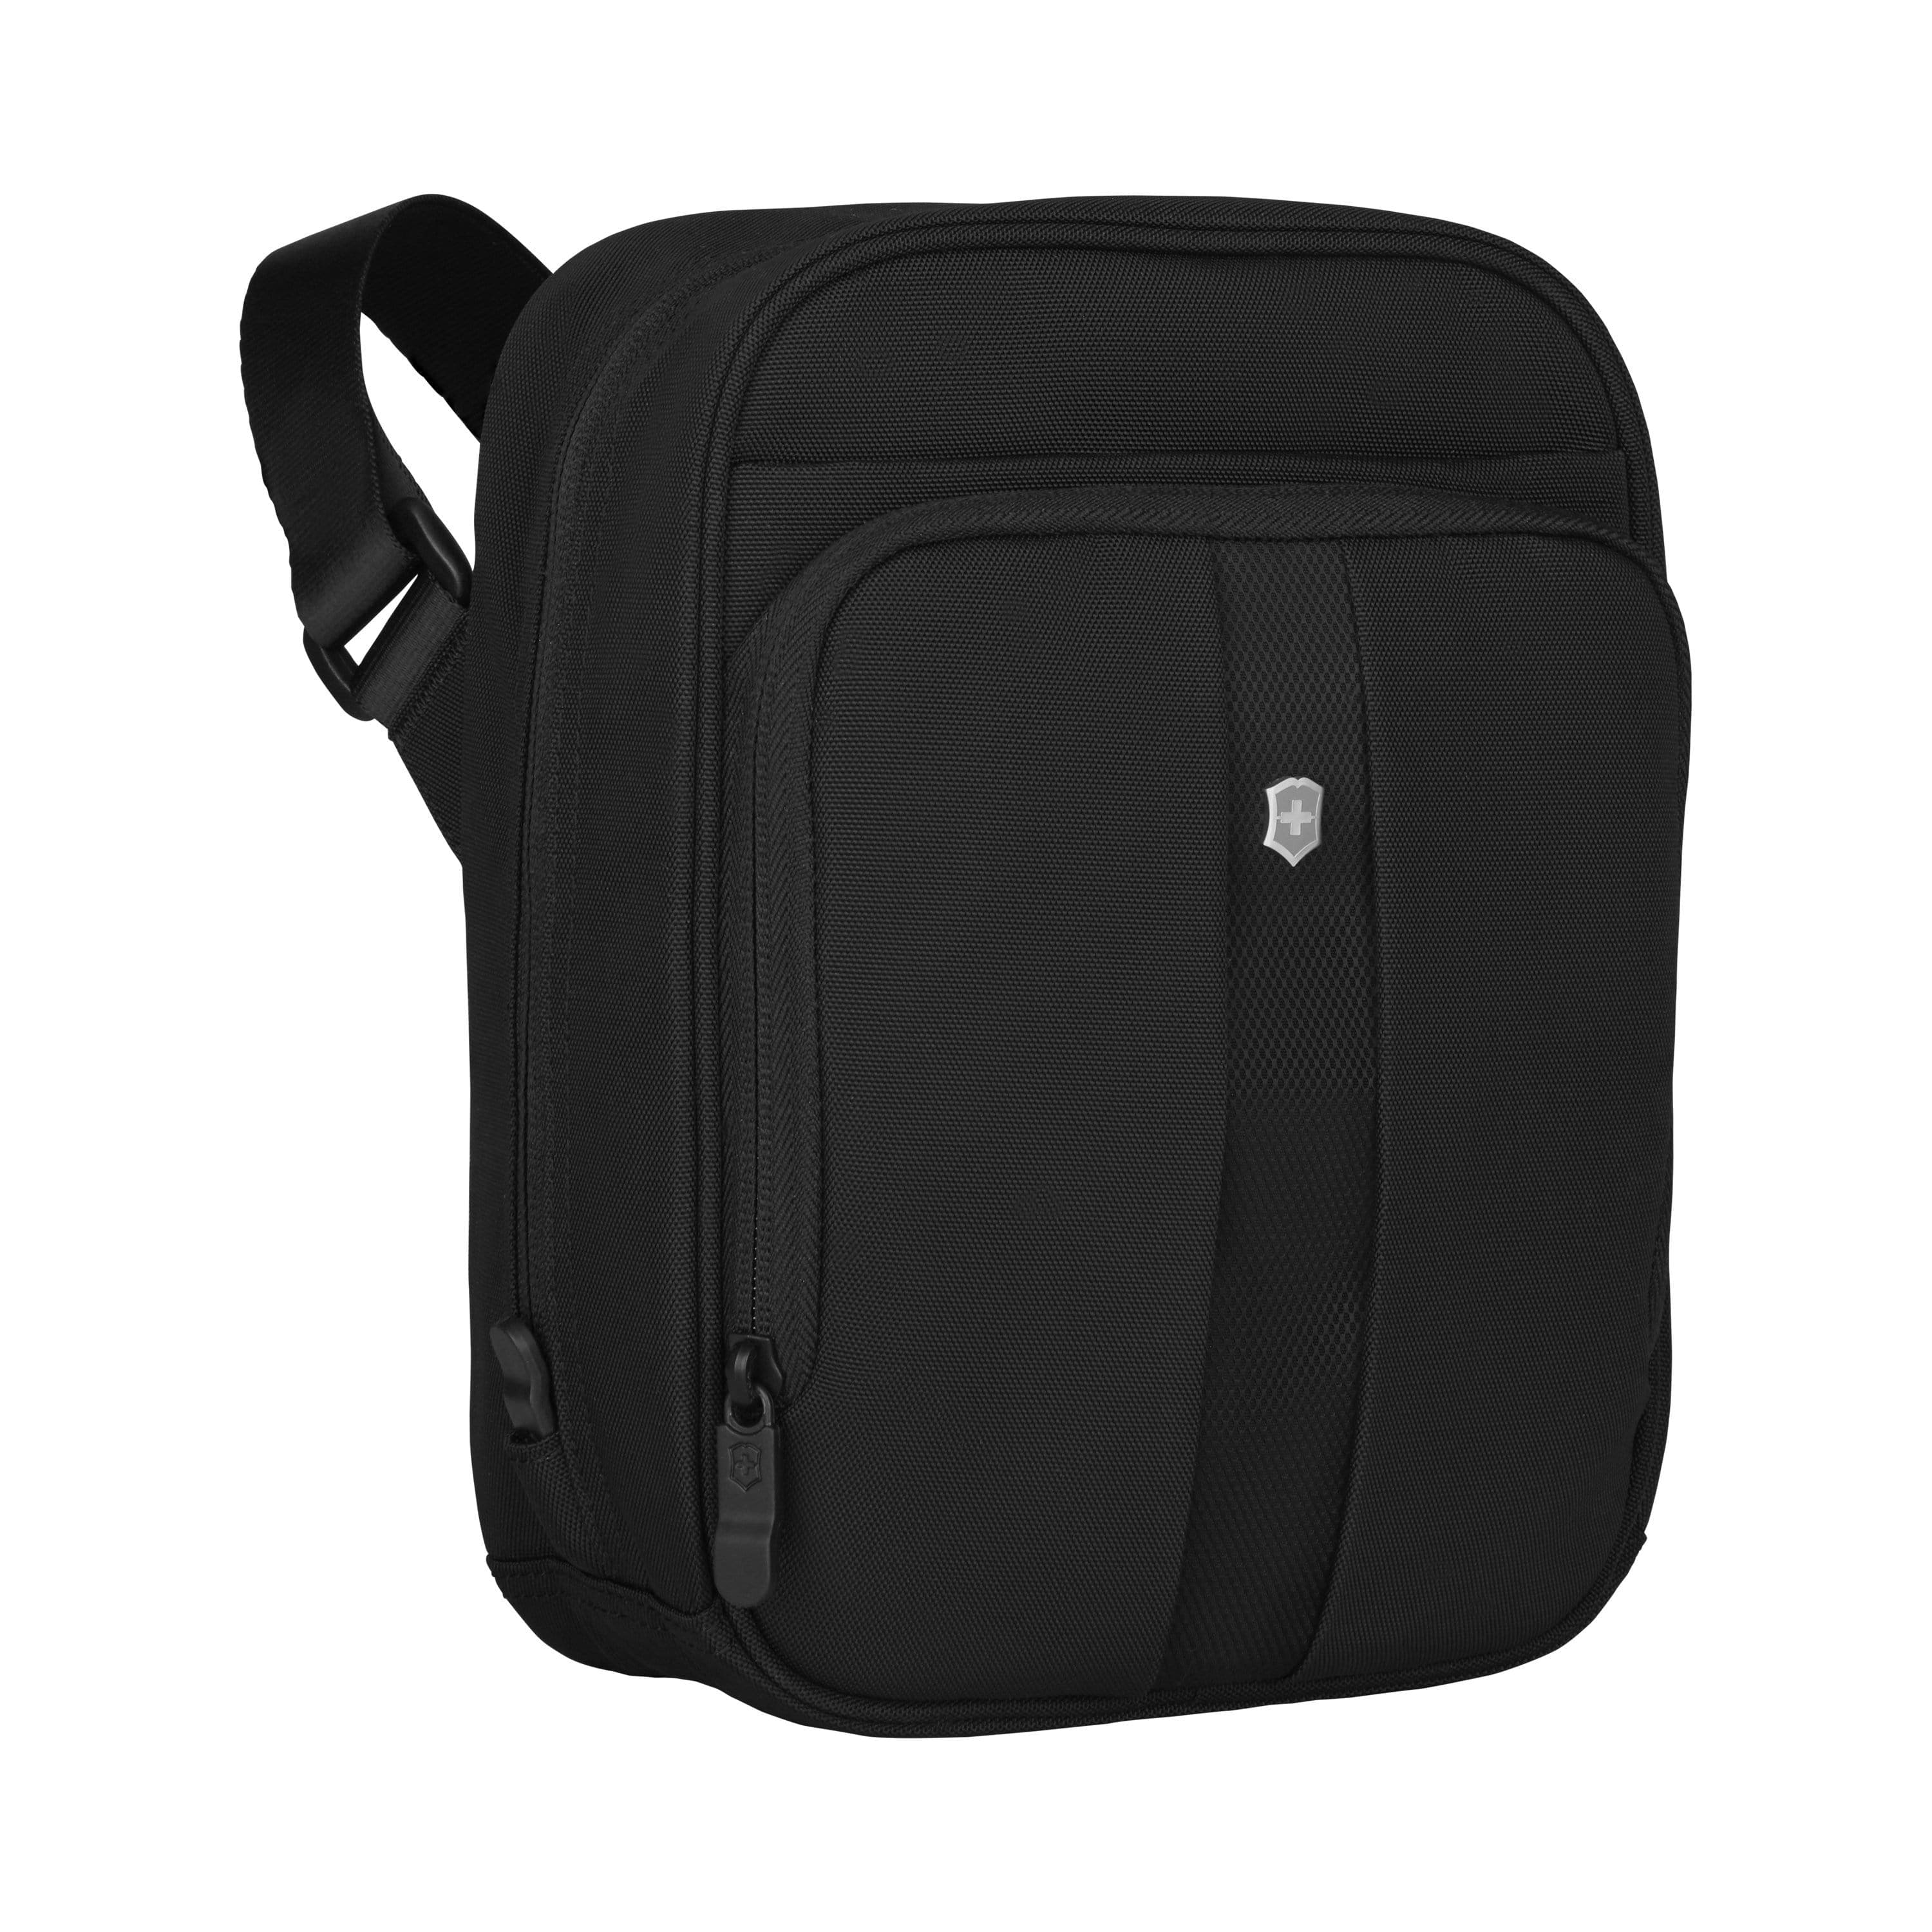 Victorinox Travel Accessories 5.0 Vertical Travel Companion With RFID Protection Black - 610605